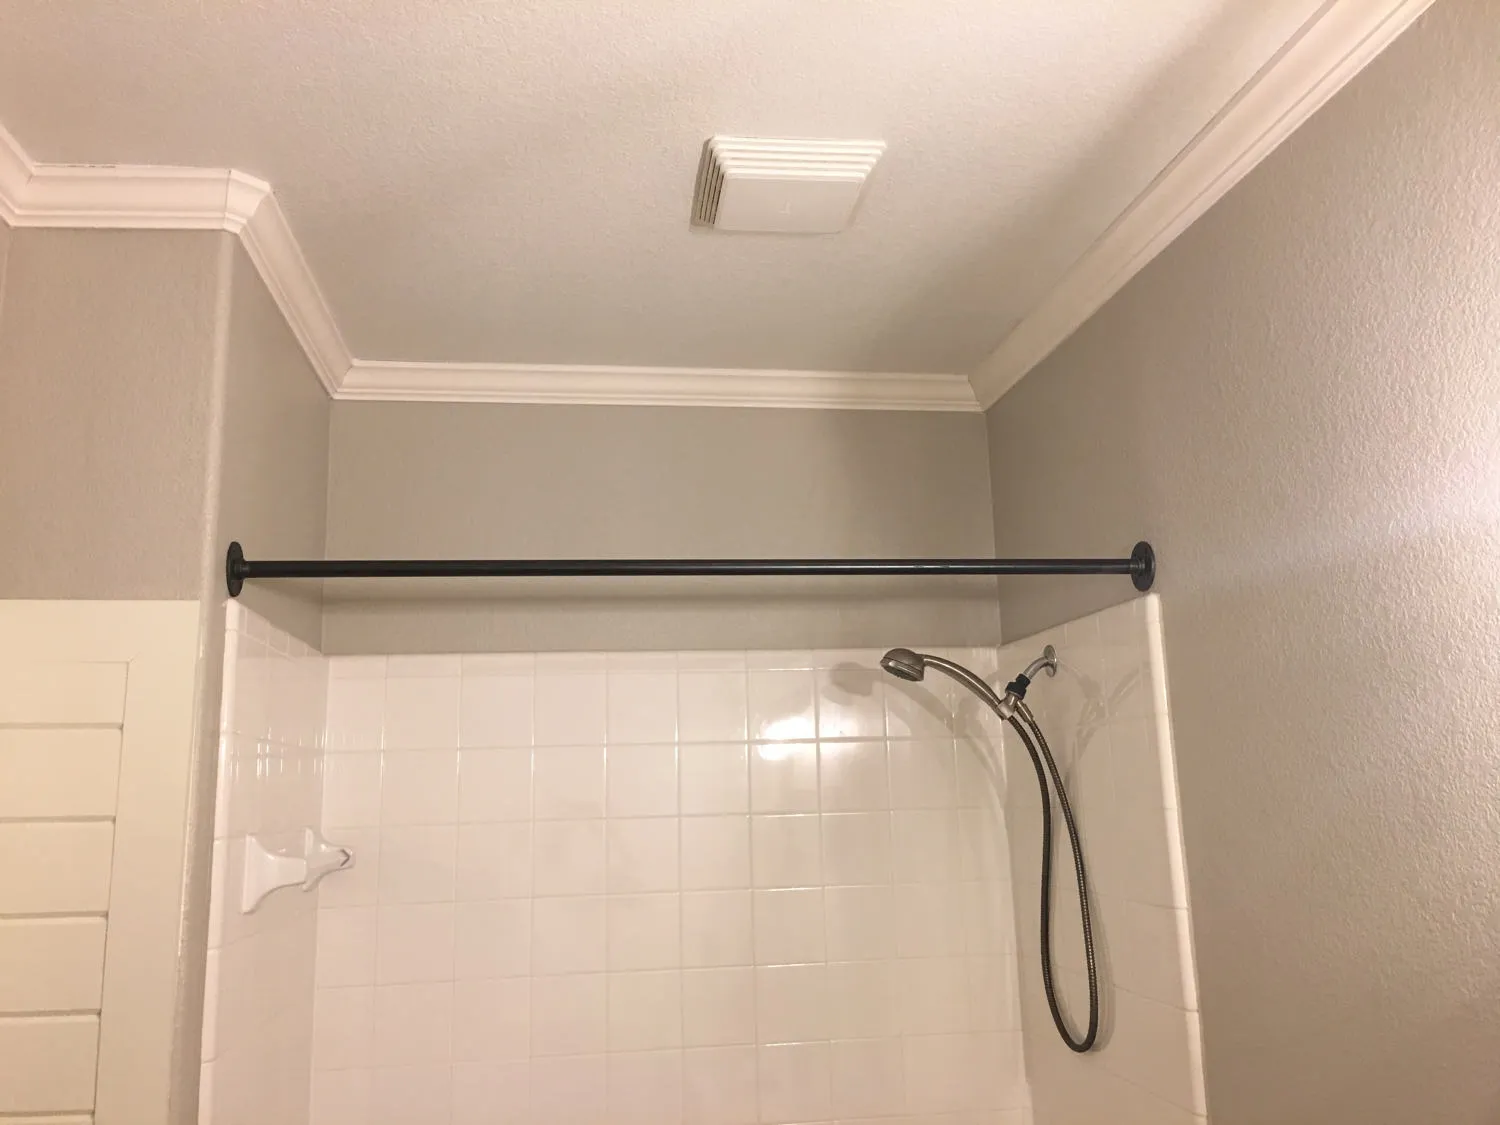 Where To Hang A Shower Rod